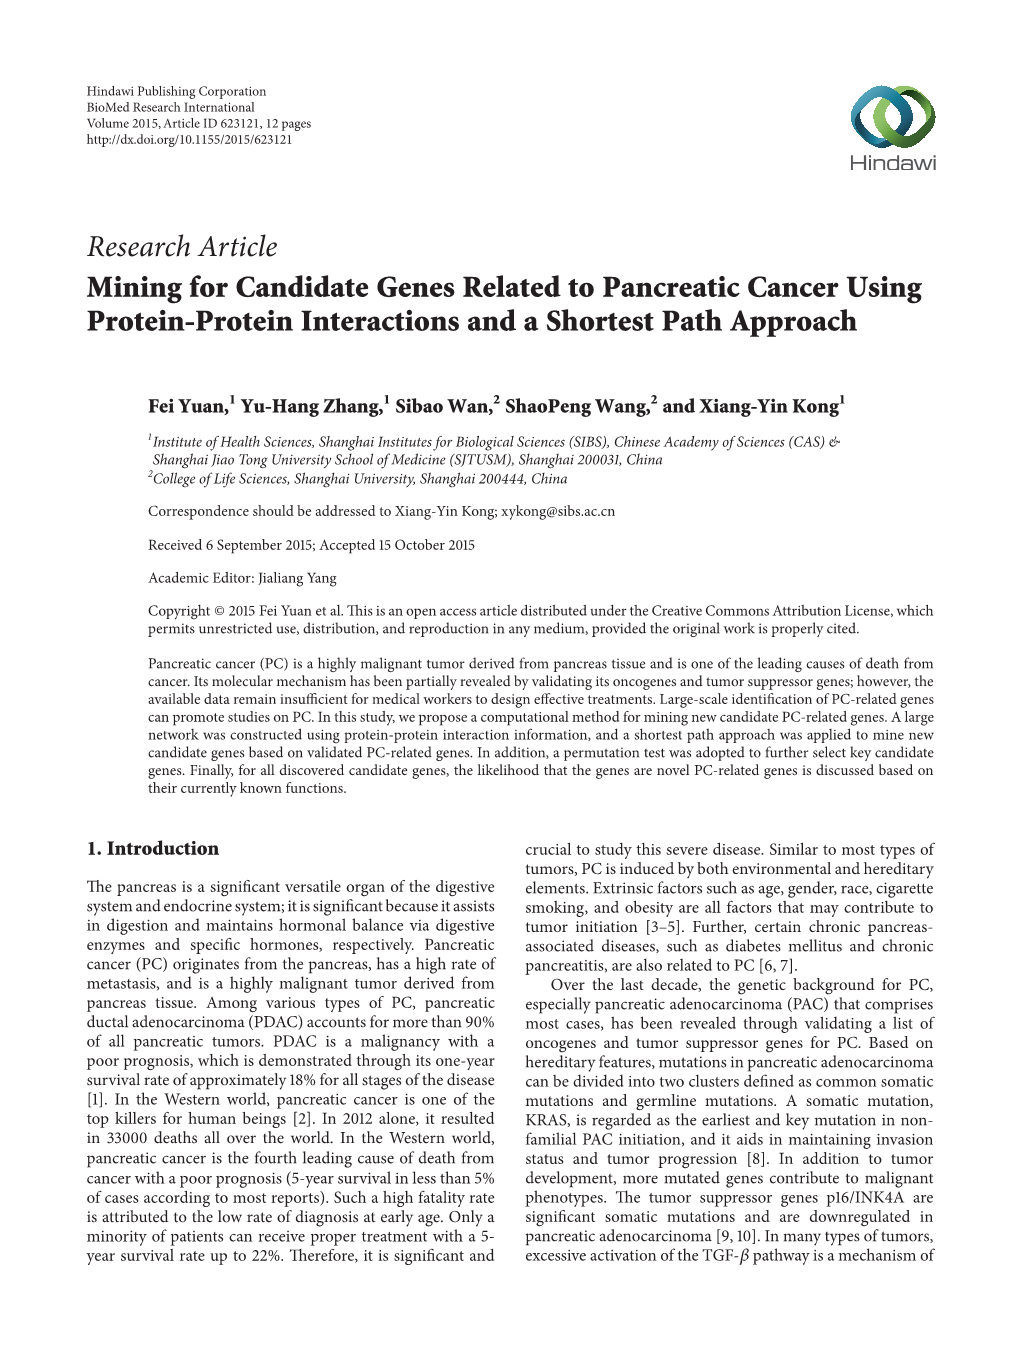 Mining for Candidate Genes Related to Pancreatic Cancer Using Protein-Protein Interactions and a Shortest Path Approach